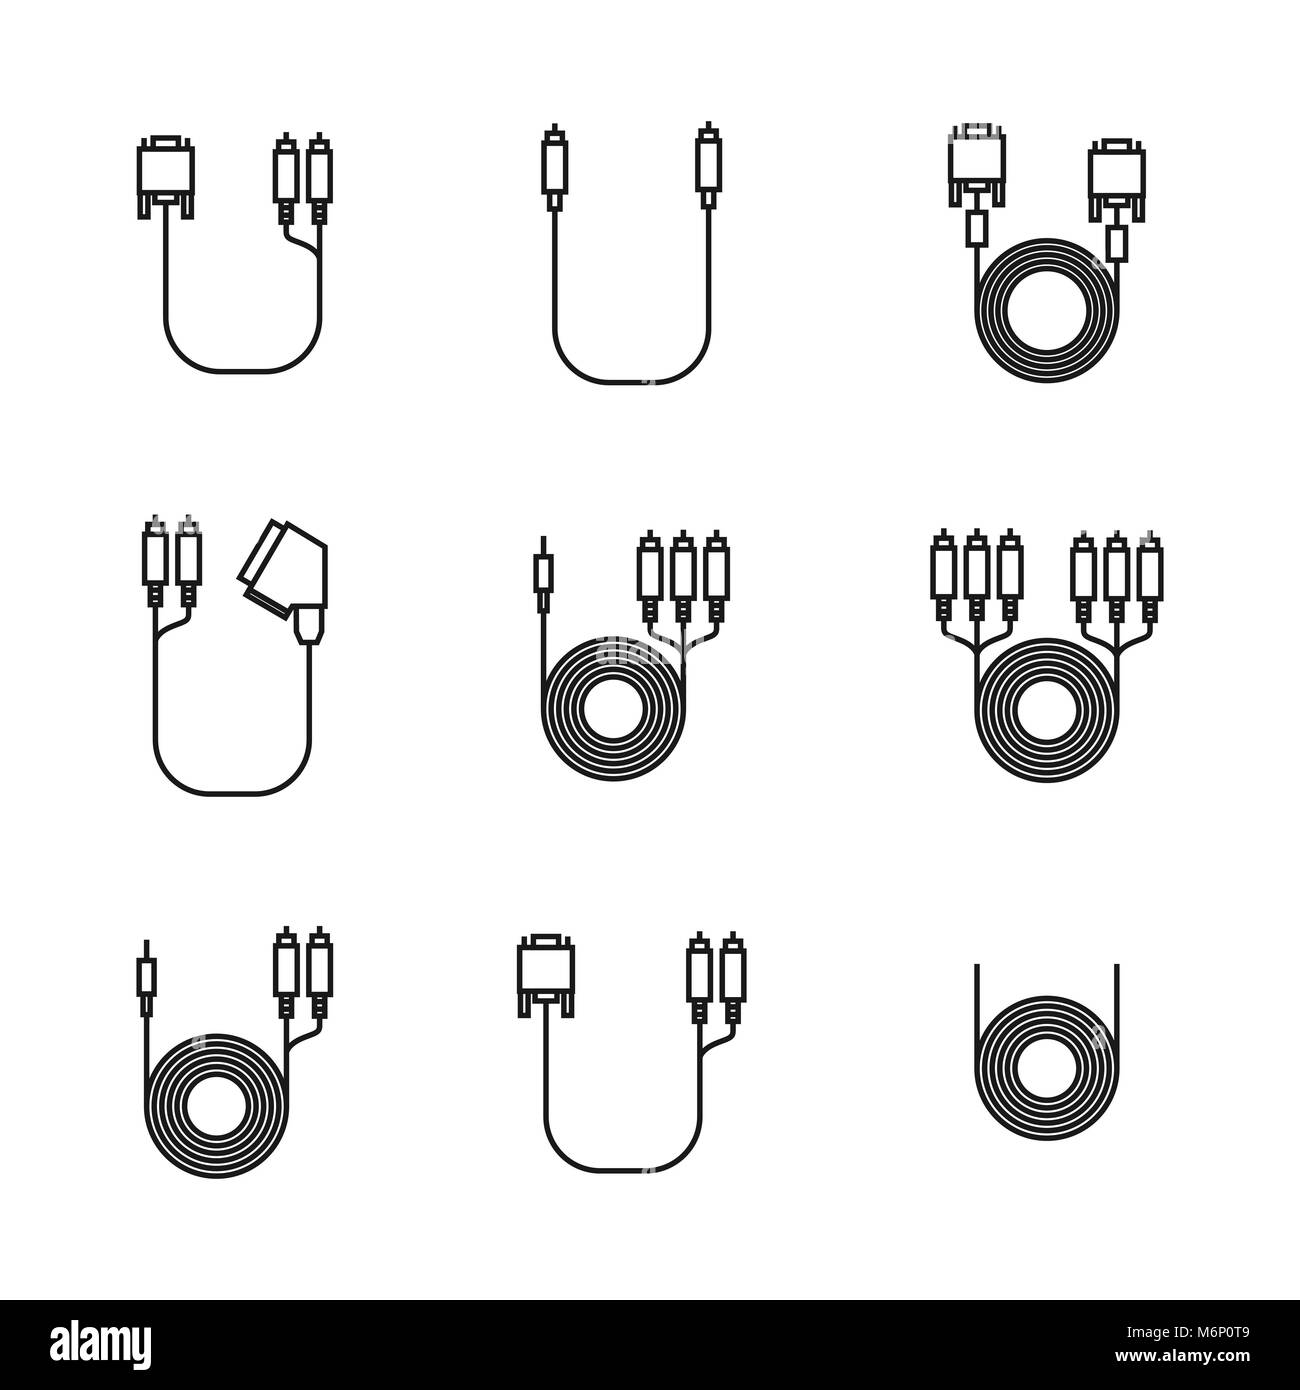 Icons of cord and cable with plugs of thin lines isolated on white background, vector illustration. Stock Vector